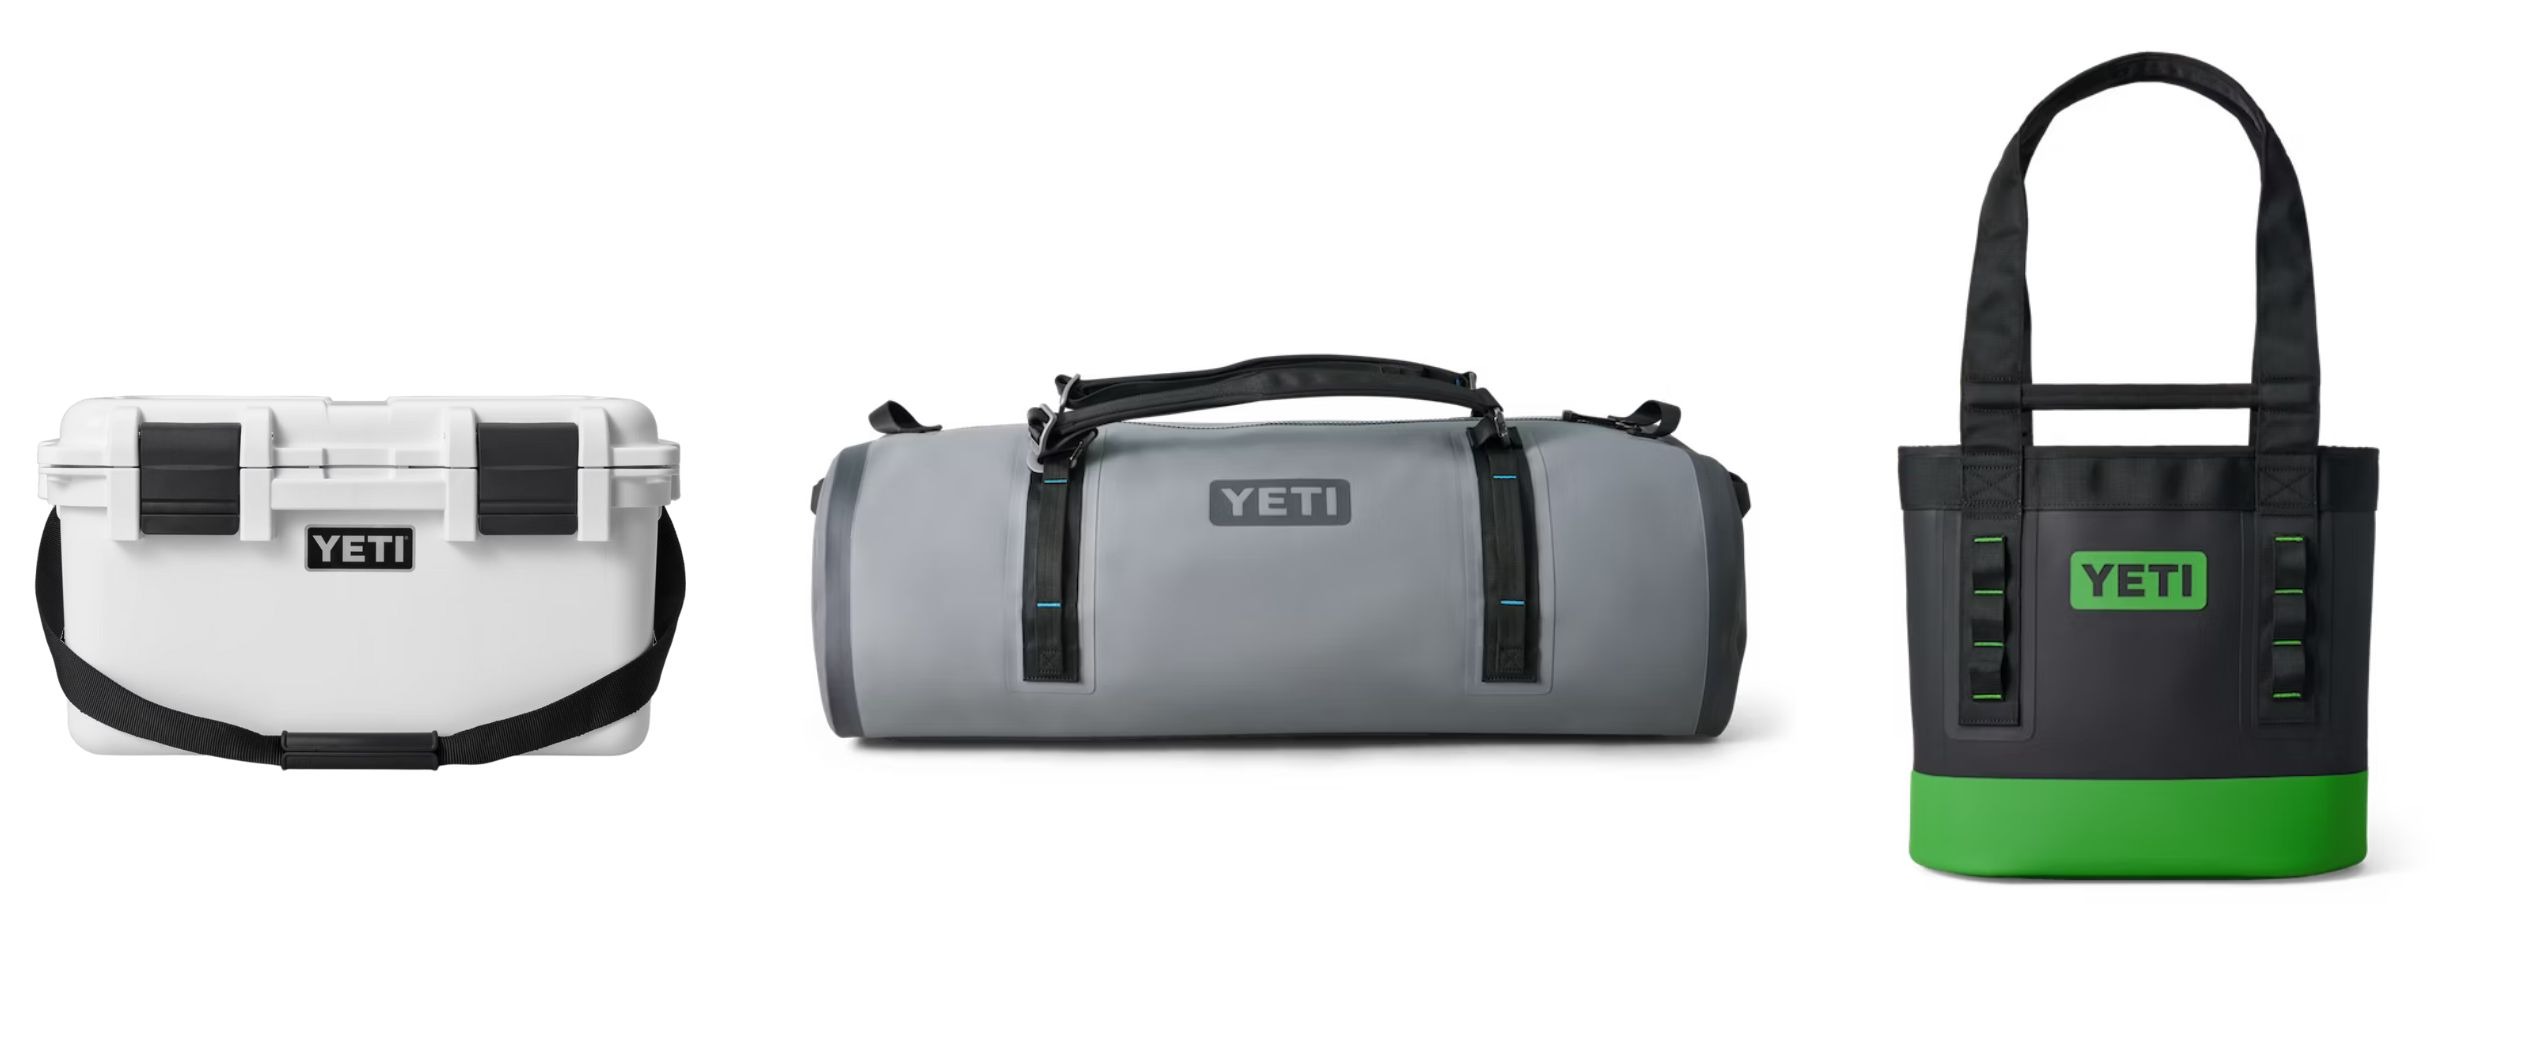 Yeti Colster Navy - Anglers Envy Fishing Charters Gear